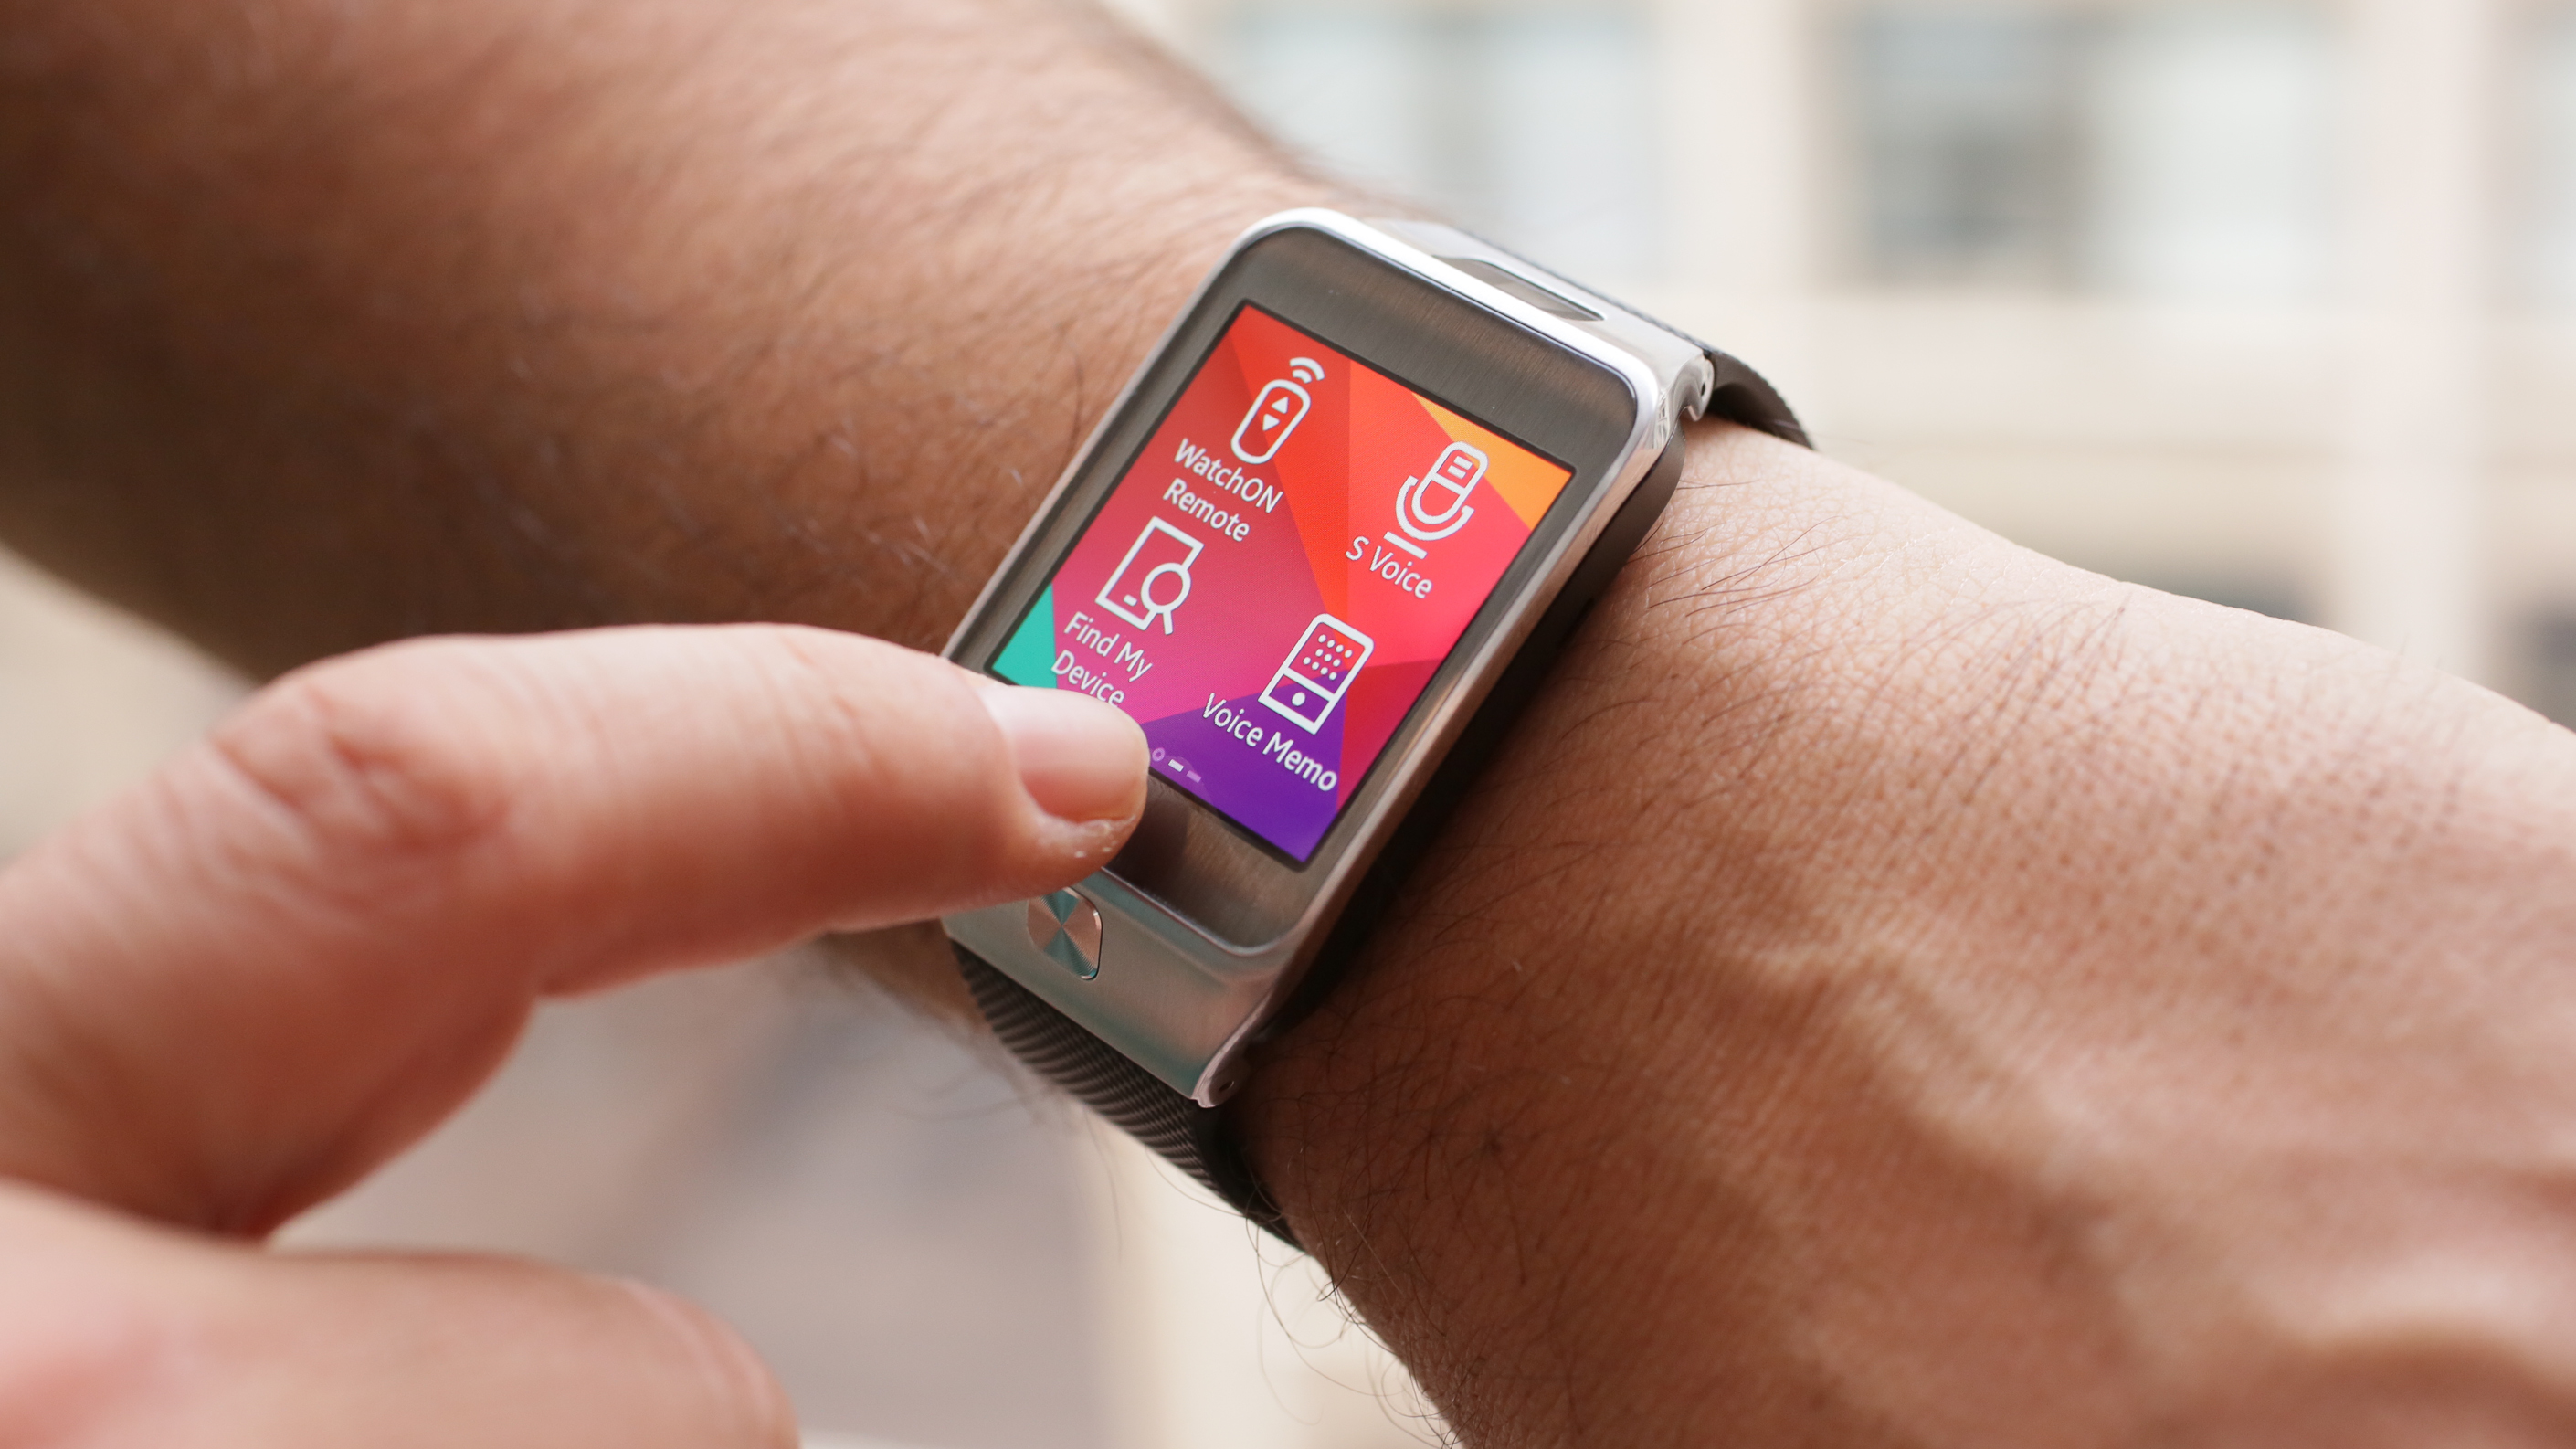 Samsung Gear 2 review: smartwatch that tries to everything - CNET